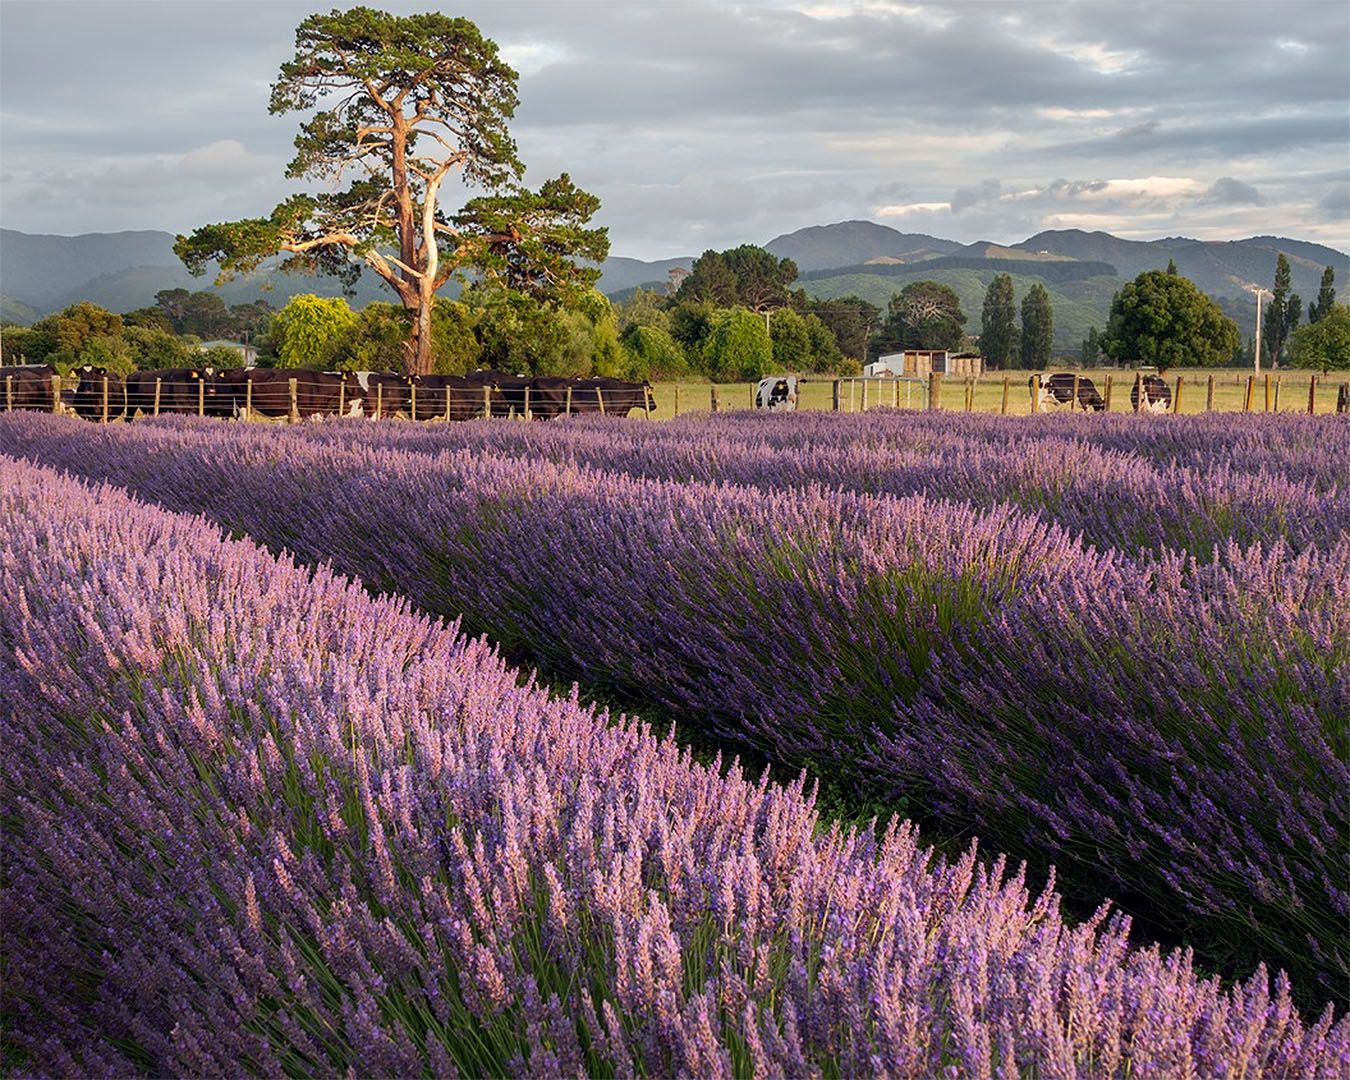 Rows upon rows of lavender with cows in the background, no doubt enjoying the scent of one of the best lavender farms in New Zealand.